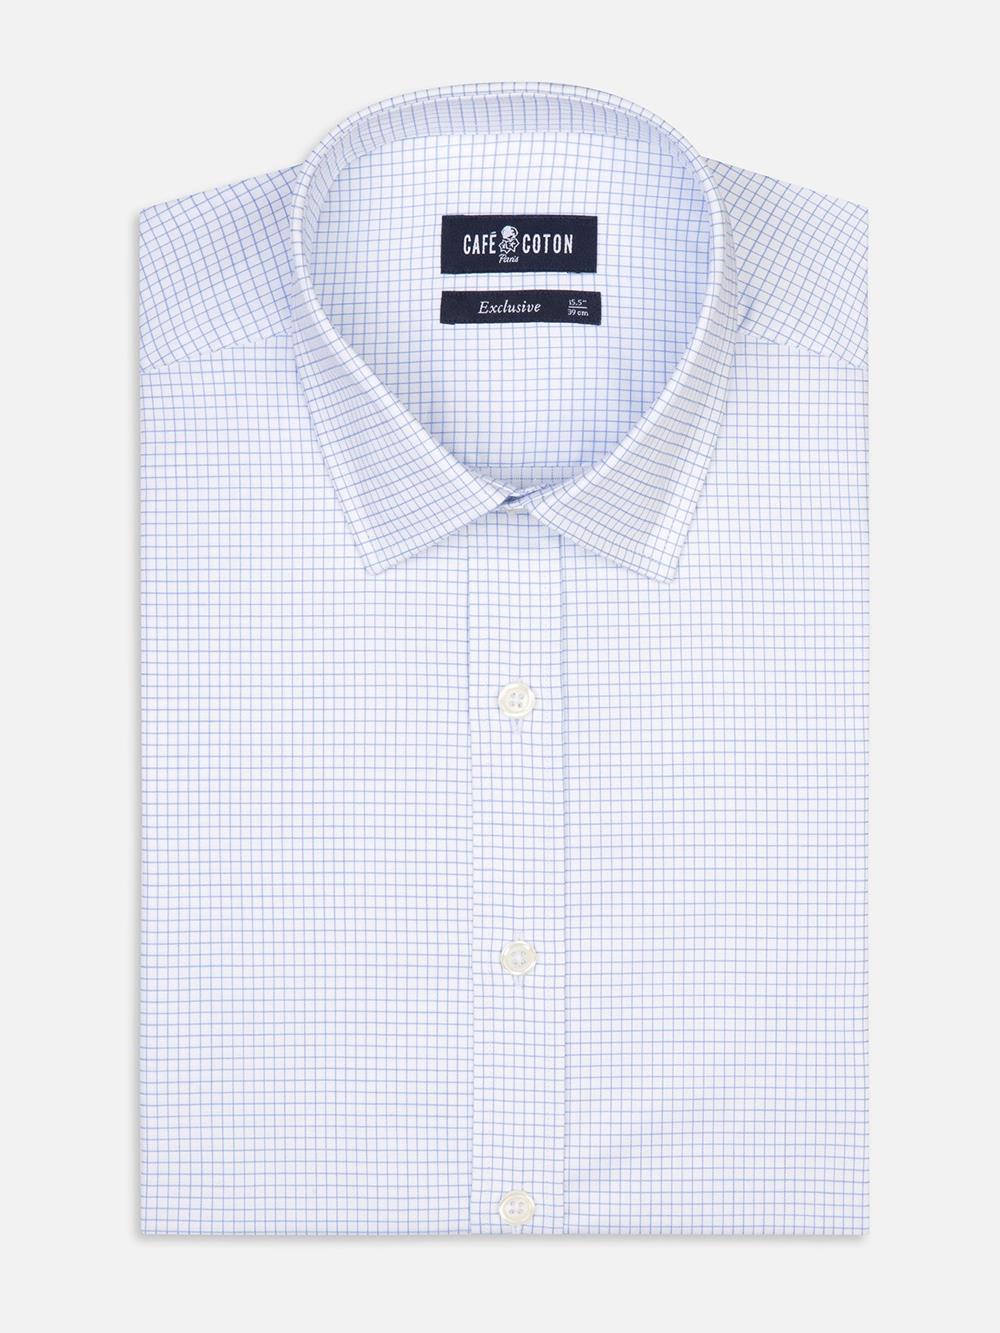 Gill sky blue checked slim fit shirt - Small collar